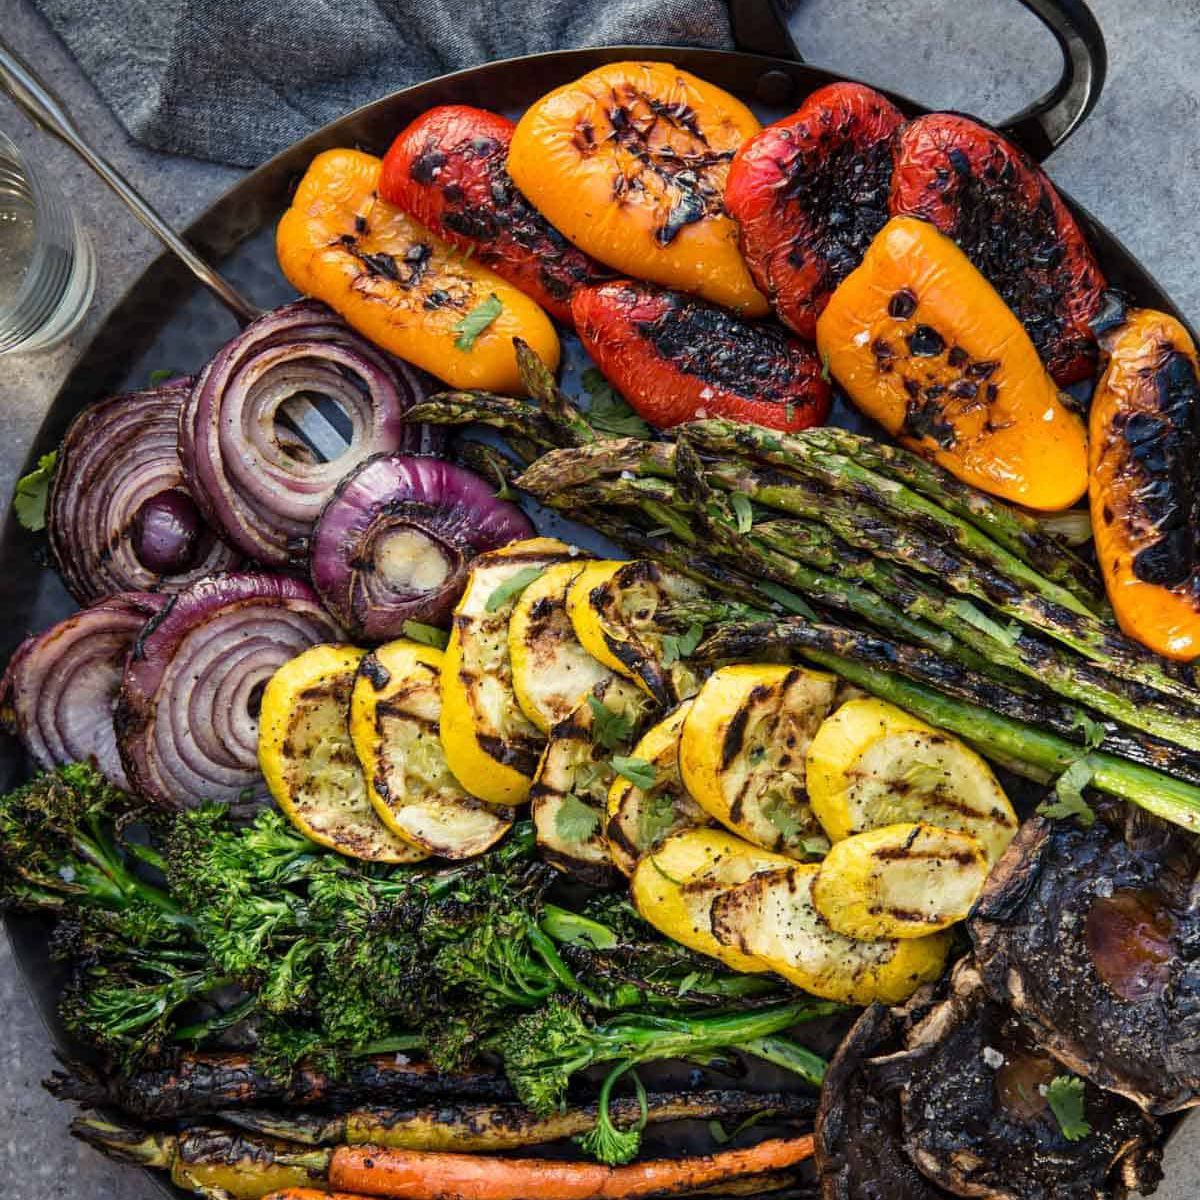 A plate full of grilled vegetables